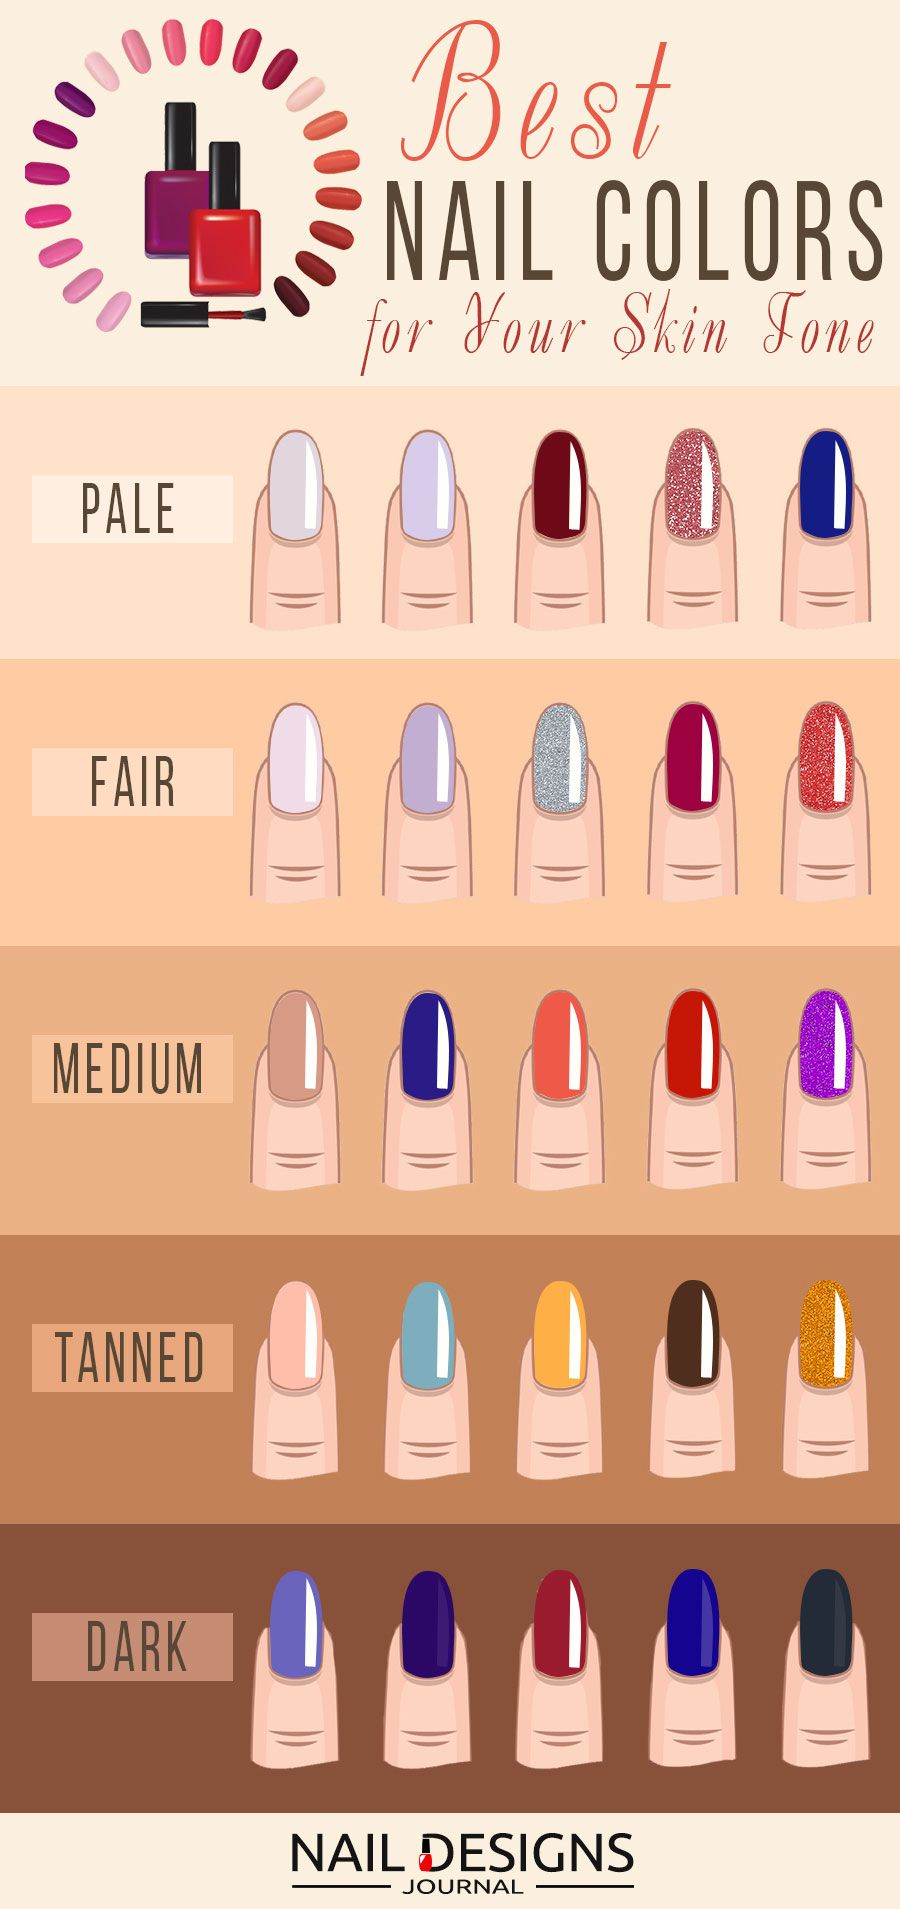 Nail art infographic for appropriate tones for skin tone